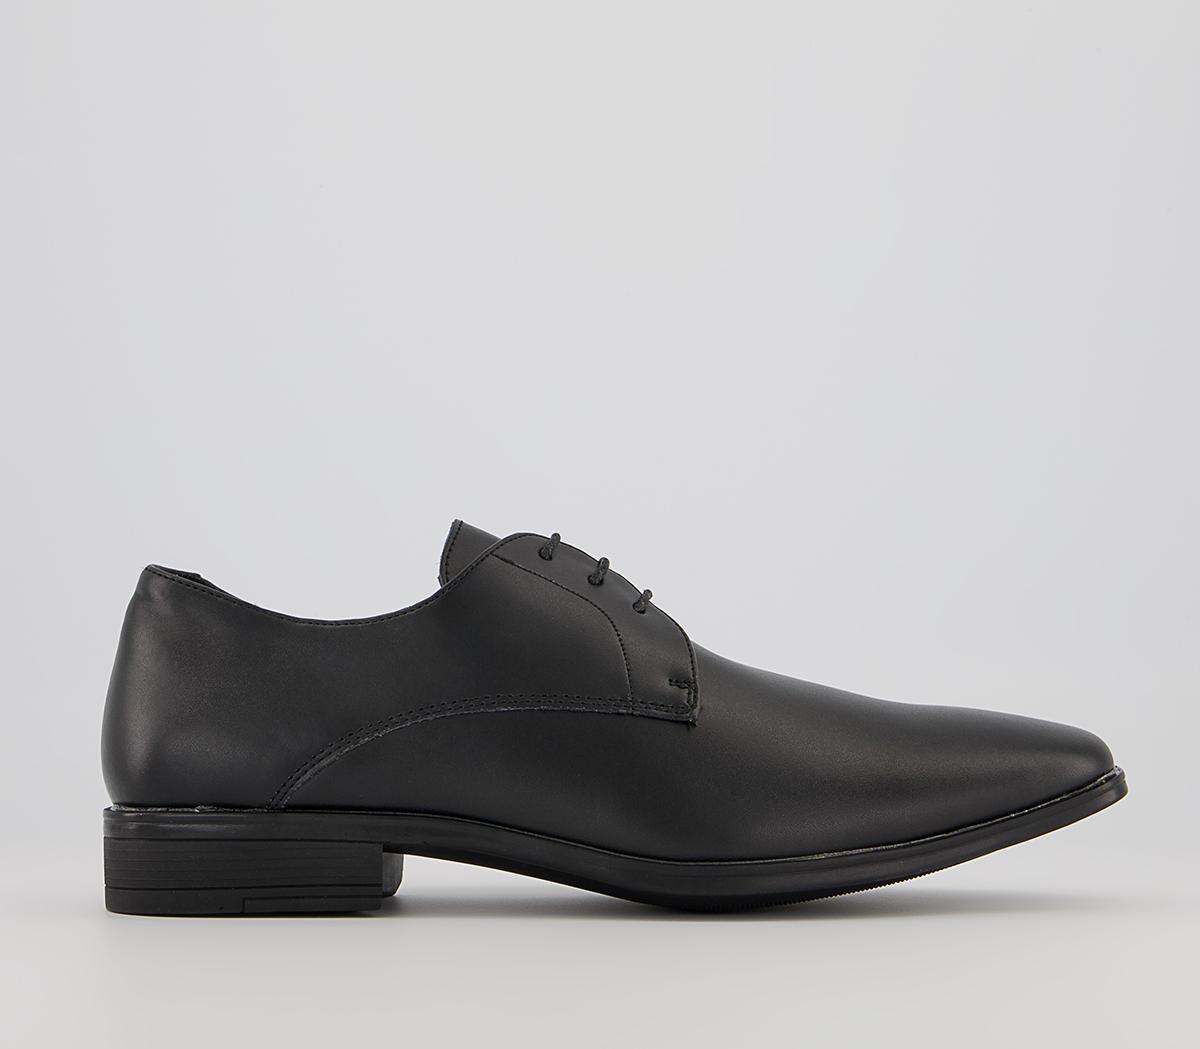 OfficeMicro 2 Plain Derby ShoesBlack Leather